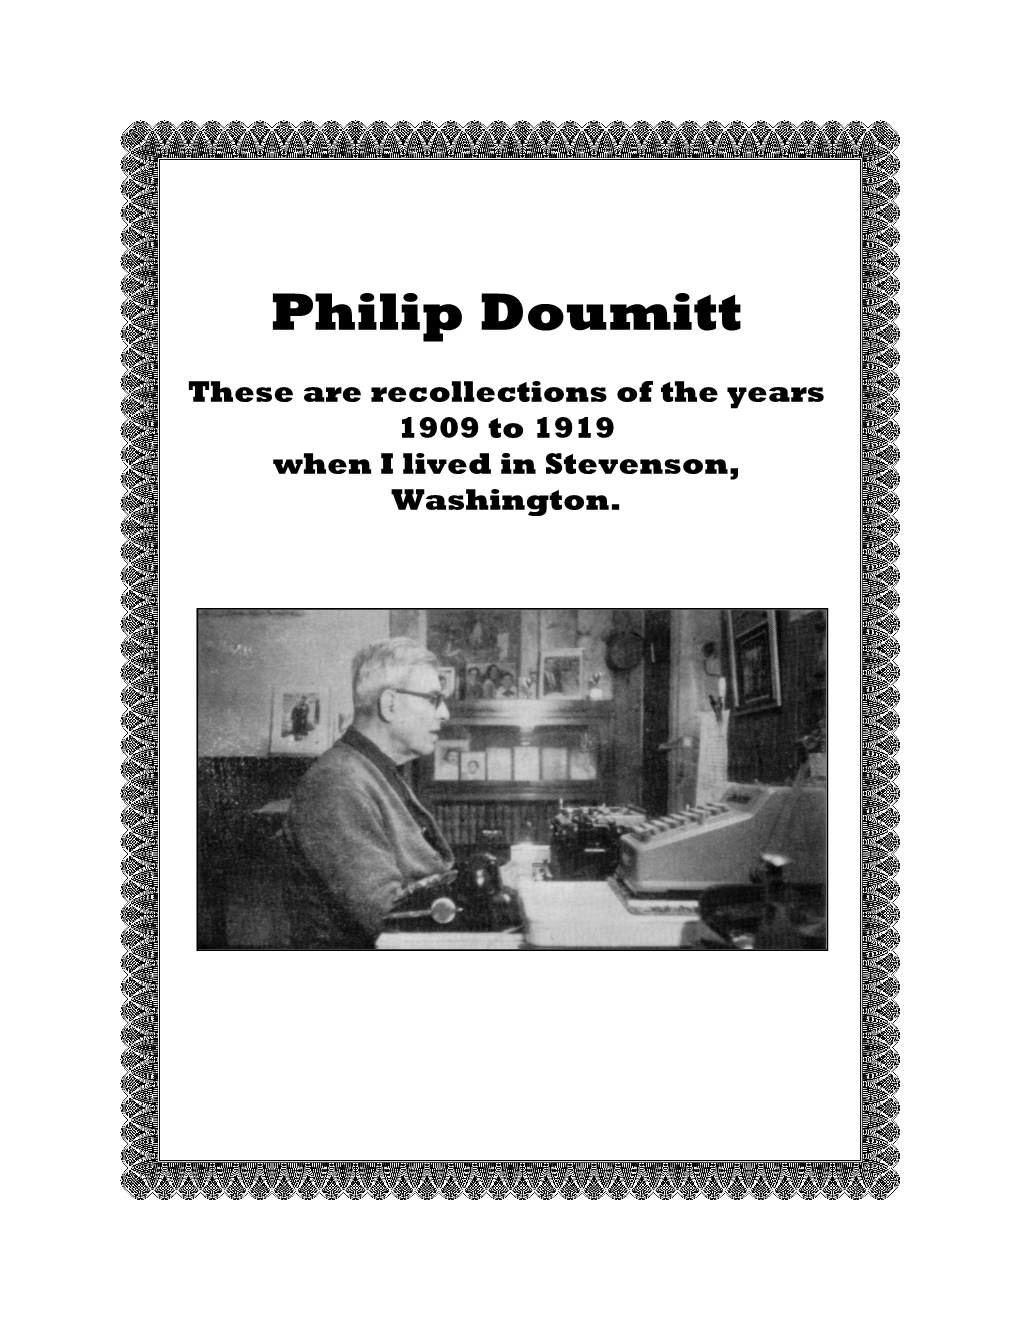 Philip S. Doumitt History — Page 2 Attach the Logs to the Cable, to Shout “Hi” for a Stop Signal, “Hi Hi” to Go Ahead Slow and “Hi-Hi-Hi” for Full Speed Ahead